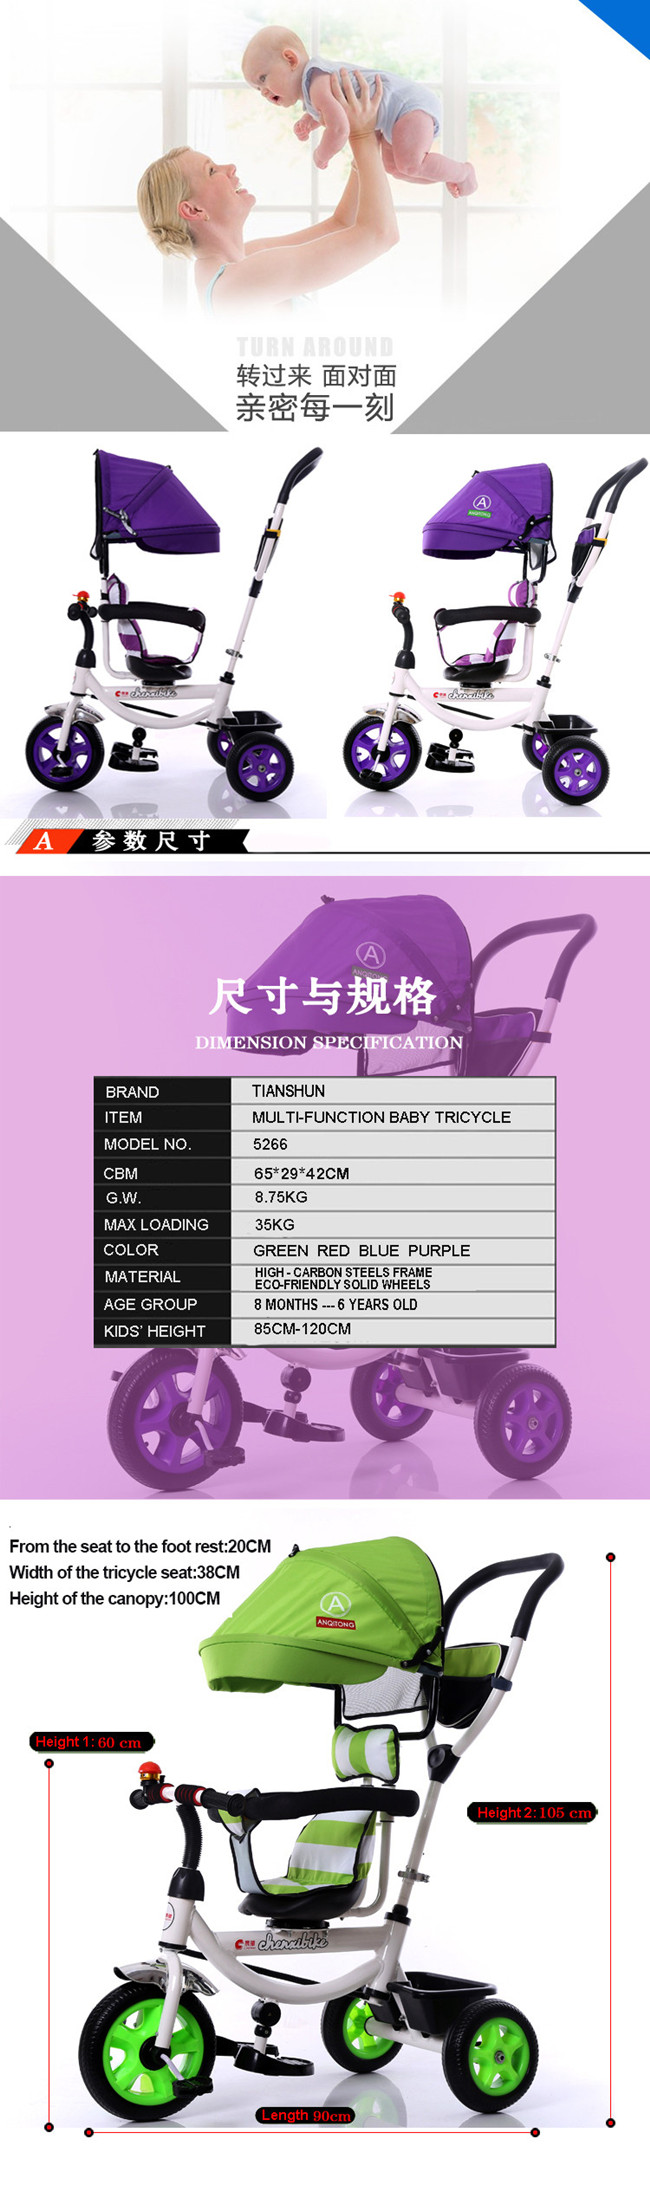 Safe and Comfortable Seat 360 Rotating Tricycle for Baby with Pushbar